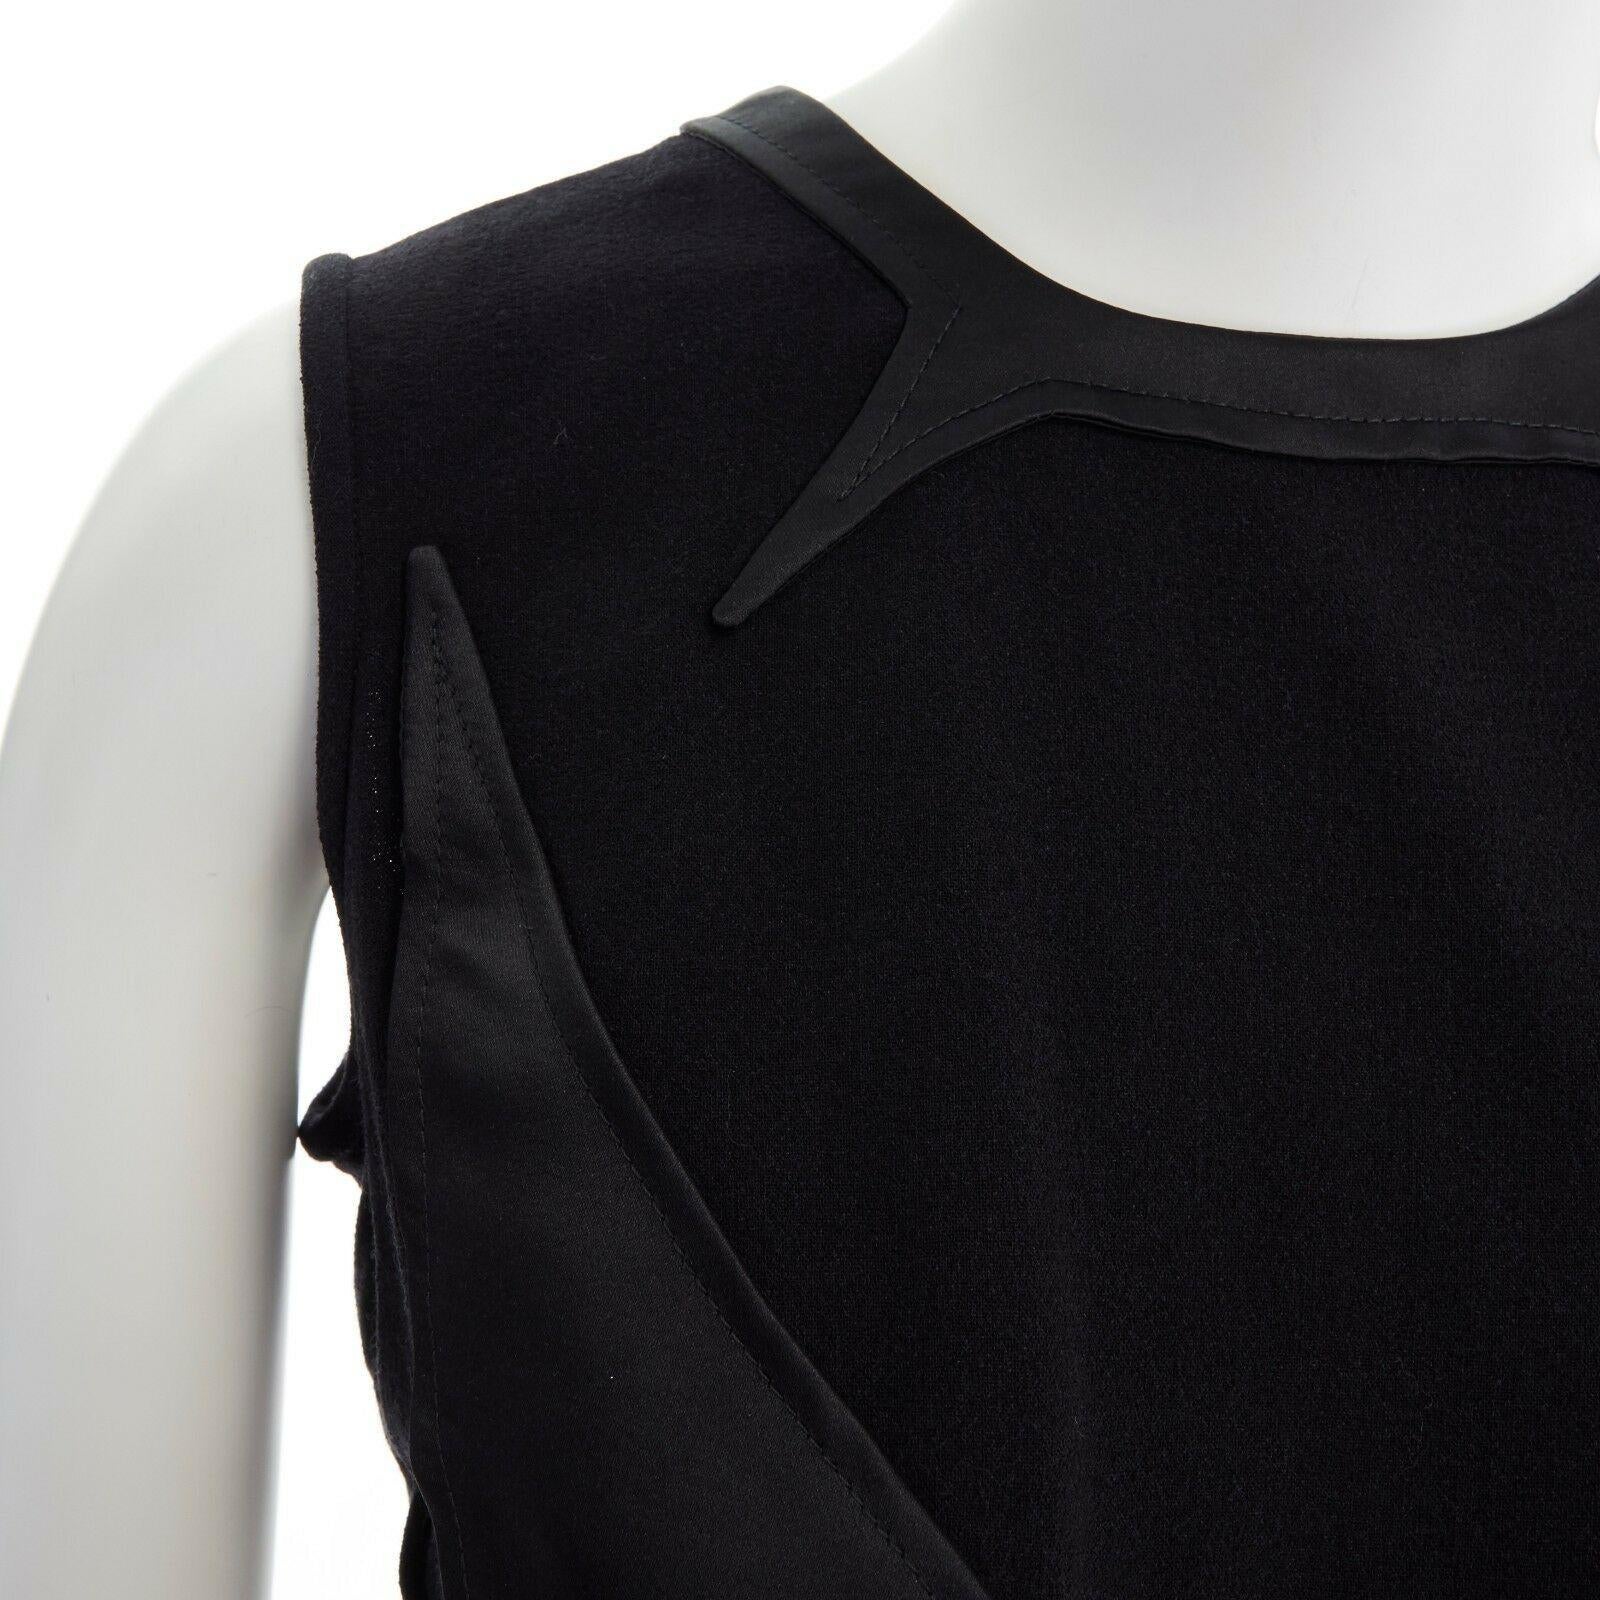 GIVENCHY TISCI 2011 black angular patched sheer skirt layer dress FR38 M
GIVENCHY BY RICCARDO TISCI
FROM THE 2012 COLLECTION
Wool, polyamide, elastane. 
Black. 
Round neckline. 
Sleeveless. 
Angular pattern patch at front. 
Dropped waist. 
Flared